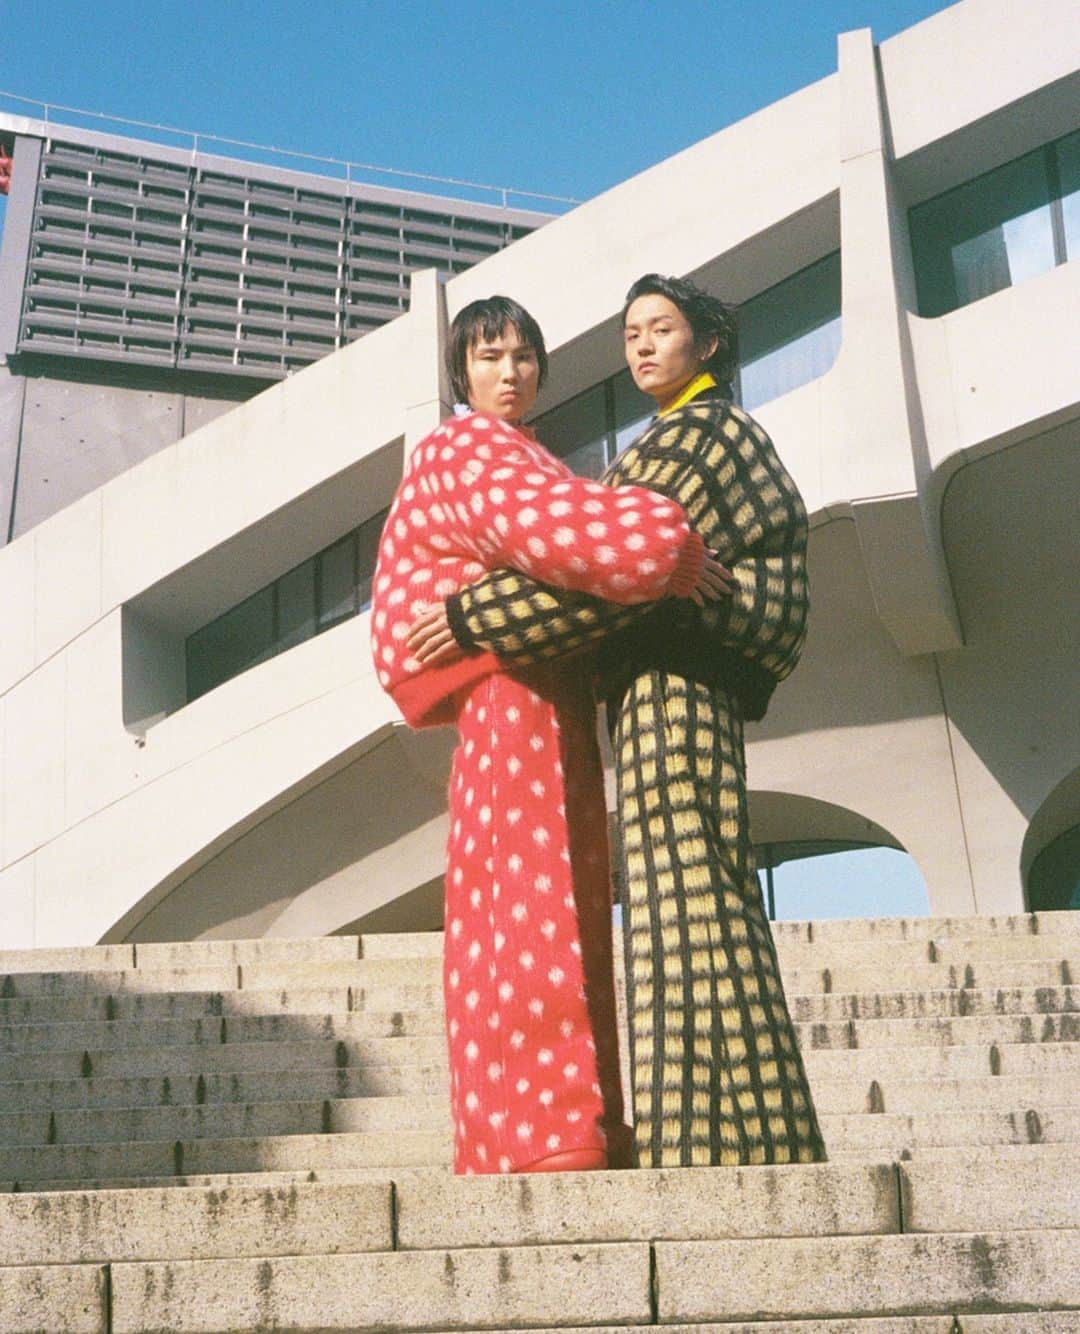 i-Dさんのインスタグラム写真 - (i-DInstagram)「The collection @marni Creative Director Francesco Risso (@asliceofbambi) showed in Tokyo seemed to signal a kind of reset, chiming with a wider call in the fashion world for less gimmick, more substance.⁣⁠ ⁣⁠ “I think we are overloaded by information and wanting to influence people to be a bit more contained or bring some clarity,” Francesco reflects a couple of months later. “I think we miss clarity in the world right now: everything feels so scattered and so chopped up.”⁣⁠ ⁣⁠ Hit the link in bio to read the full story taken from our Summer issue, where Risso discusses building community through delivering substance and clarity in an era of information overload.⁣⁠ ⁣⁠ [The Summer! Issue, no. 372, Summer 2023]⁣⁠ .⁣⁠ .⁣⁠ .⁣⁠ Text @osman_ahmed_⁣⁠ Photography @fumikoimano⁣⁠ Fashion director @mr_carlos_nazario⁣⁠ Hair @hollismithhead at Art Partner⁣⁠ Make-up @yad1m at Art Partner⁣⁠ Casting @midlandagency and @bt77 (HYPE)⁣⁠ Models Fumiya Imabashi, Seidai Fujii, Jeff Zotorvi and @shunsuke.sano at Exiles, @kainewman1 at The Society, @saki_nakashima and @mona_kawasaki25 at Tomorrow Tokyo, @sereeeenam at Box Corporation, Hayato Kurihara at Stanford, @ninautashiro at Far East, @_saunders10 at Premier, @_hahn1010 at Wizard, @nodokausami at Unknown, @3fron at Midland, @palomija at IMG, Giorgio Galgano at Persona, Elina Zhuravleva at Magma Tokyo, @bitterchocolateboy, Riku Furuta, Kadeem Spencer and Isami Nasu⁣⁠ All clothing and accessories #MARNI AW23」6月28日 3時05分 - i_d